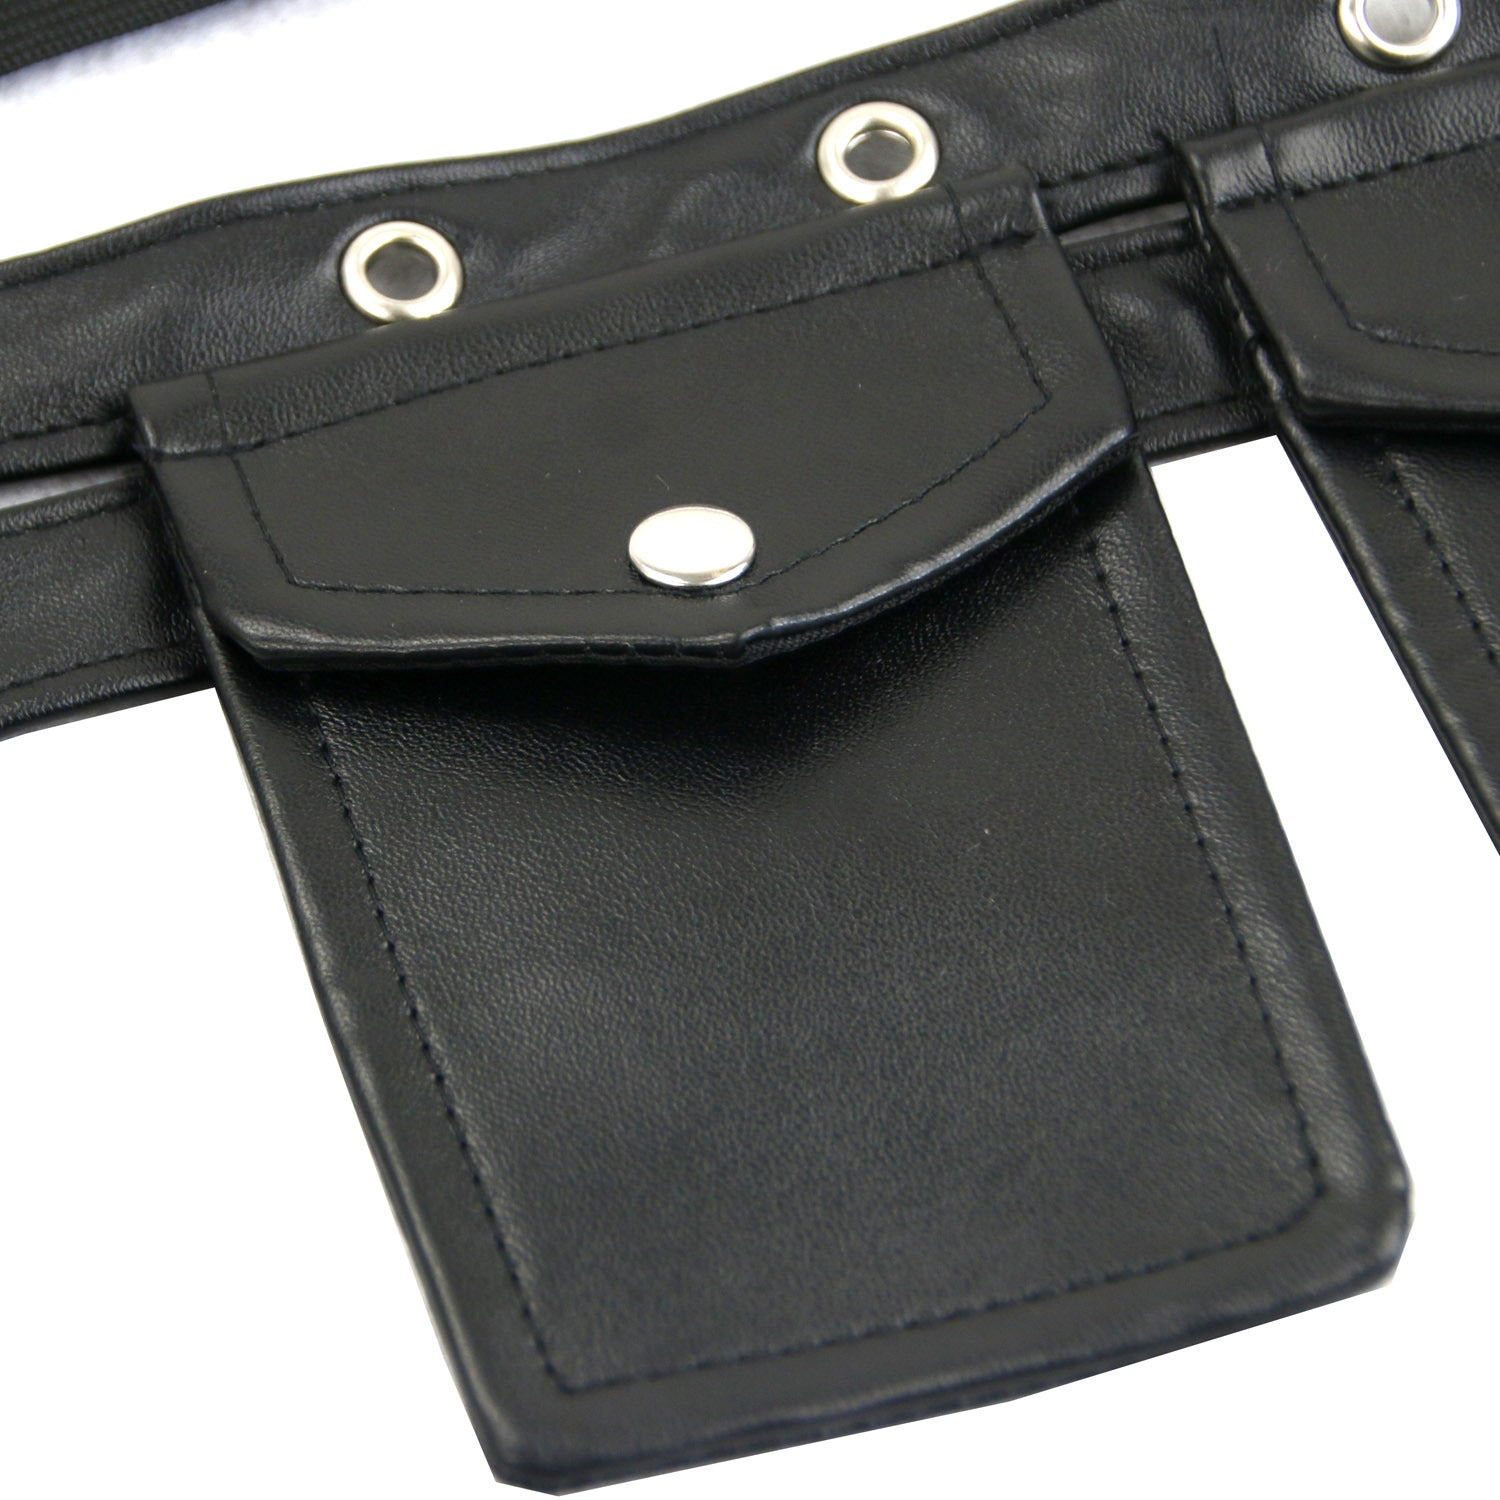 A Maramalive™ Waist Pocket Belt Corset Steampunk Costume Accessory with two metal buckles.